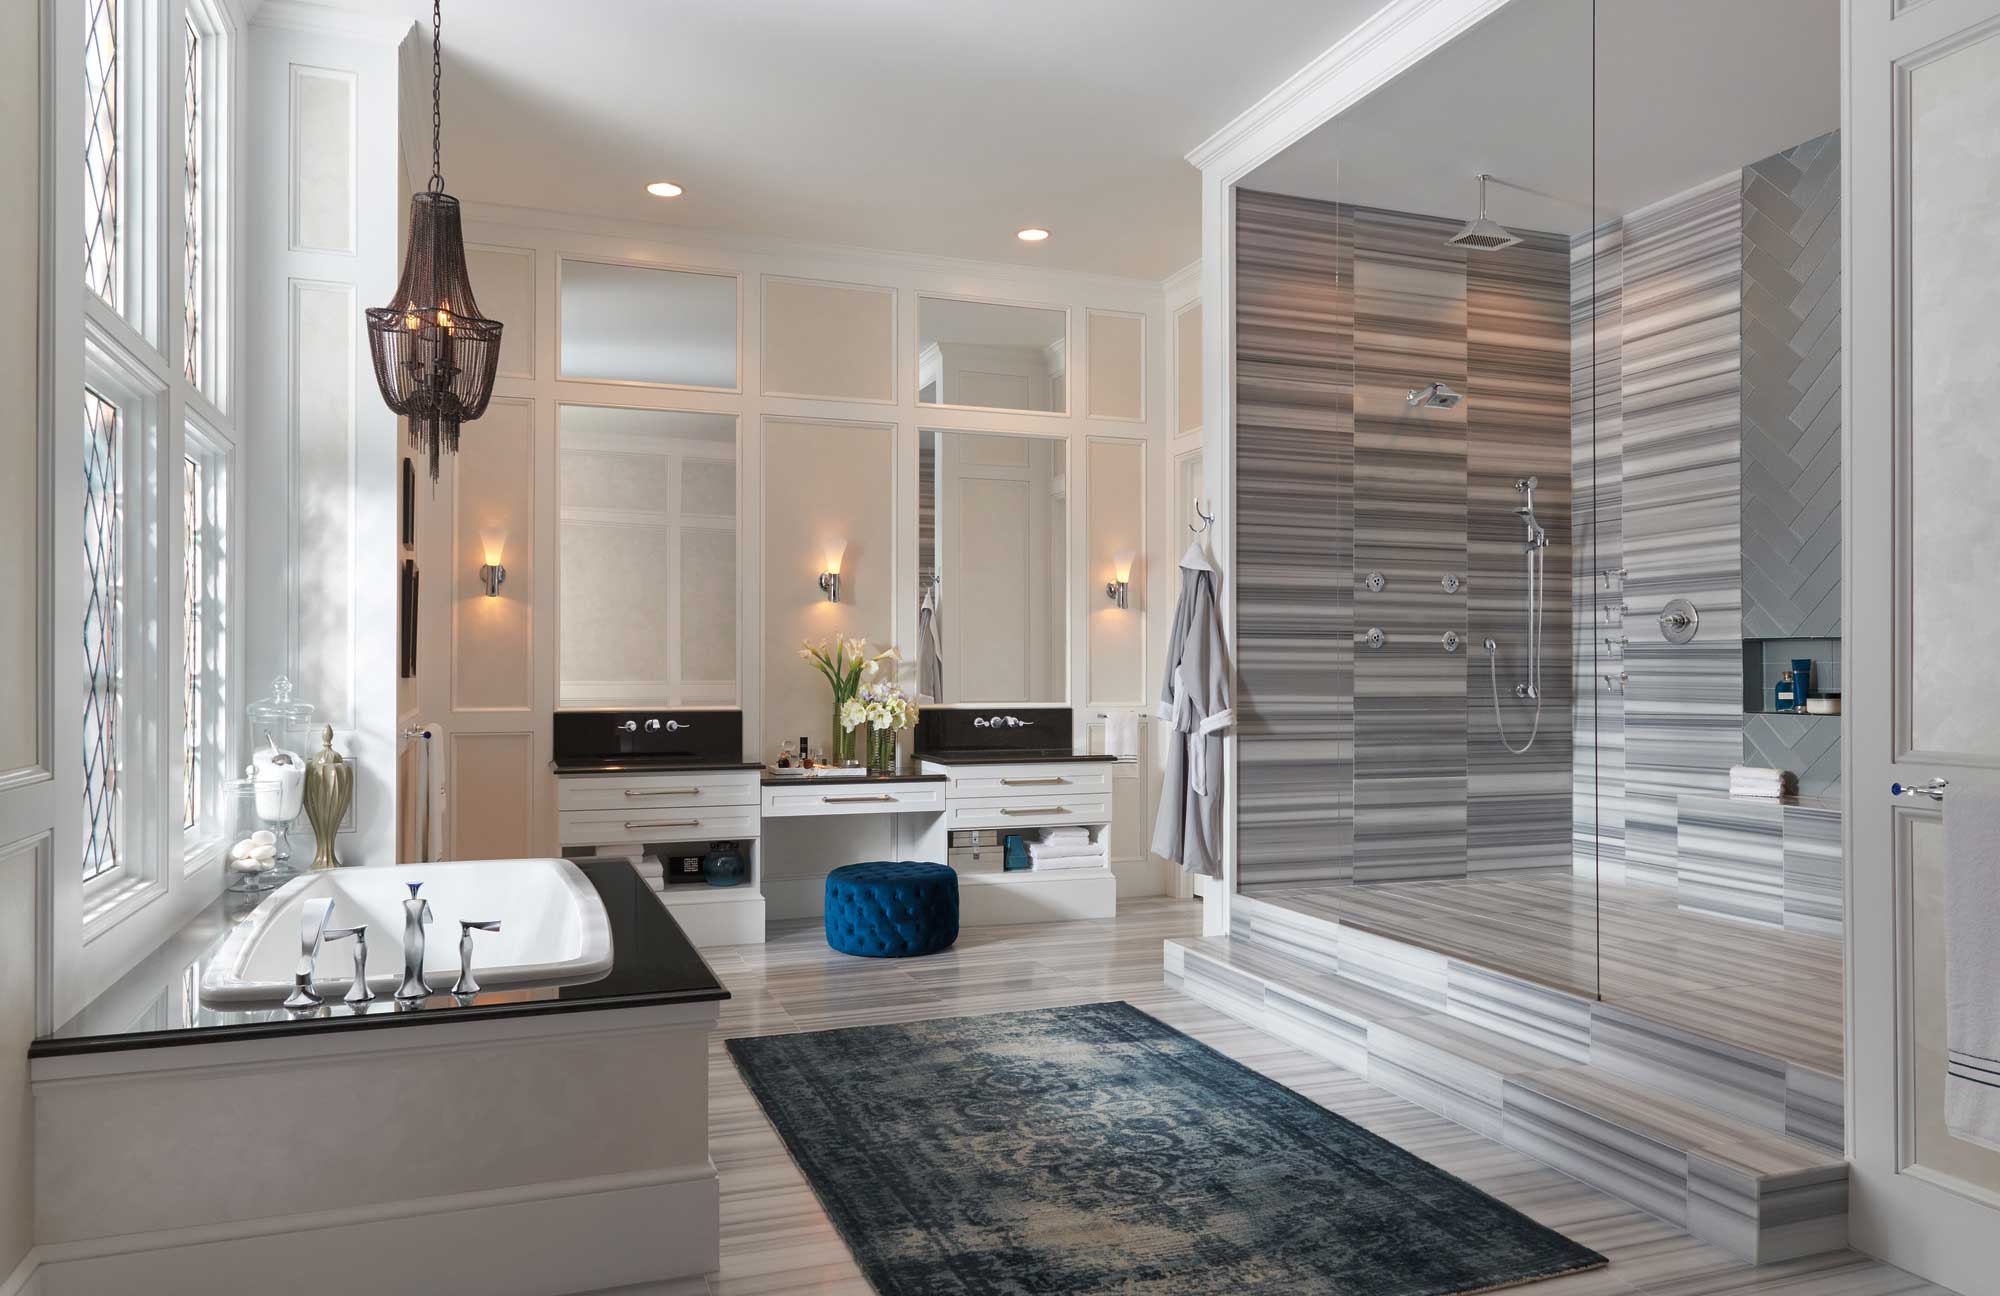 luxurious bathroom with oversized walk in shower and freestading tub